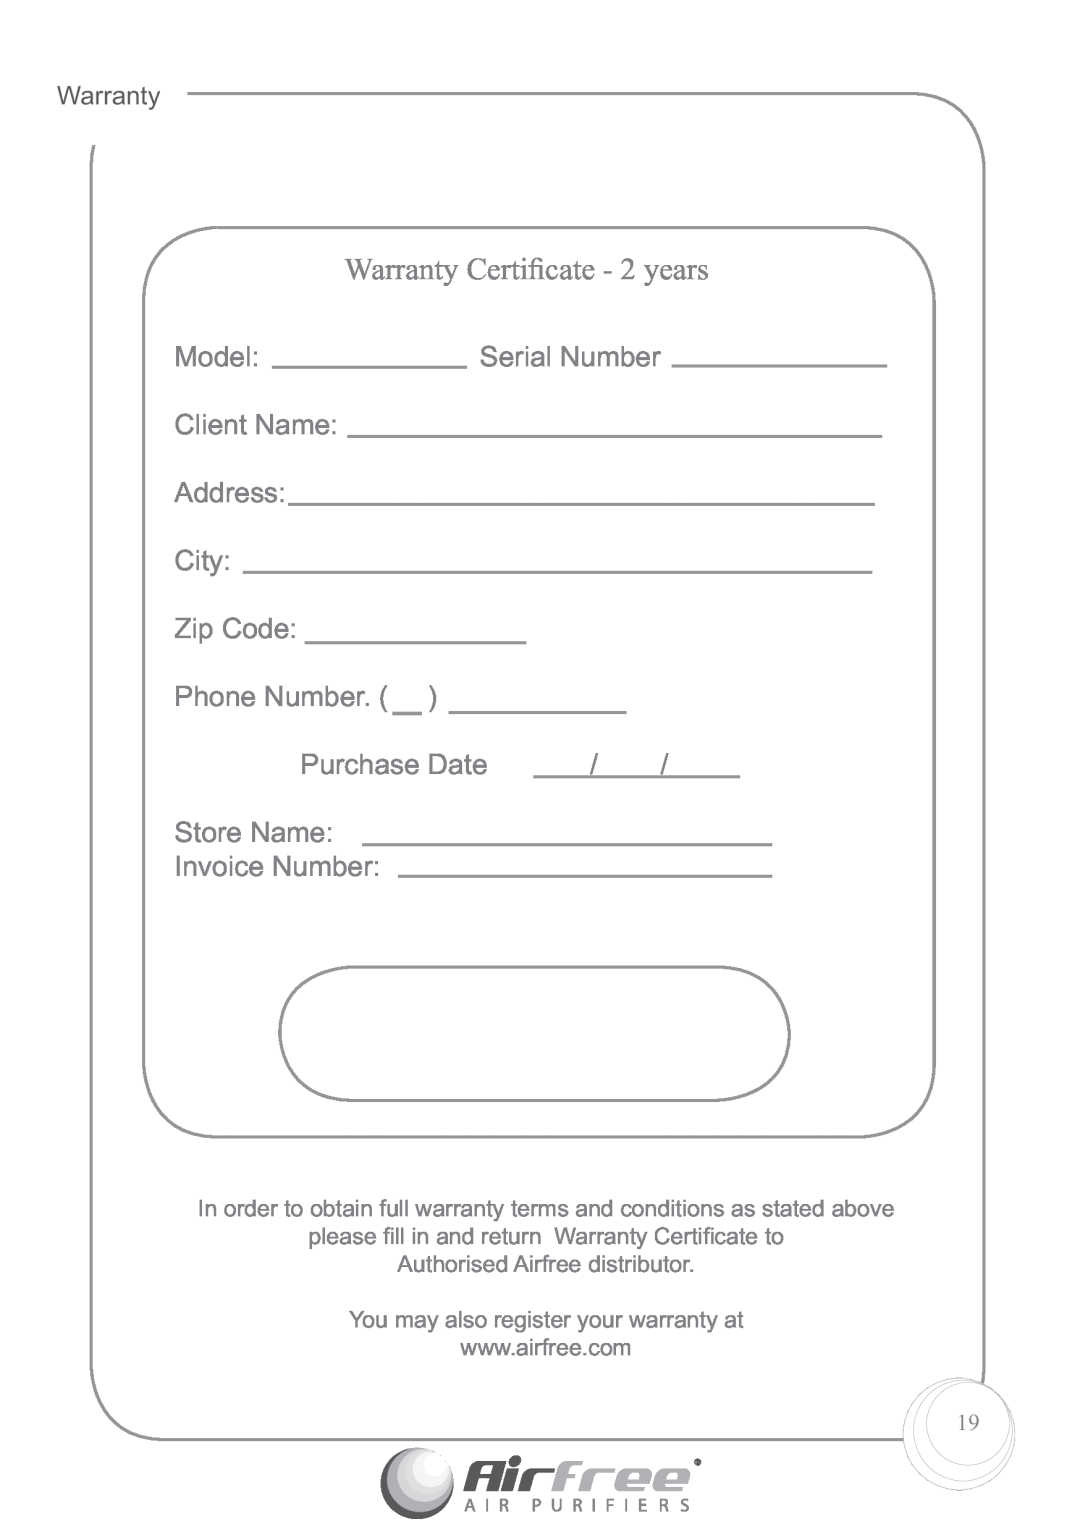 Airfree P125, P60 Warranty Certiﬁcate - 2 years, Model, Serial Number, Client Name, Address, City, Zip Code, Phone Number 